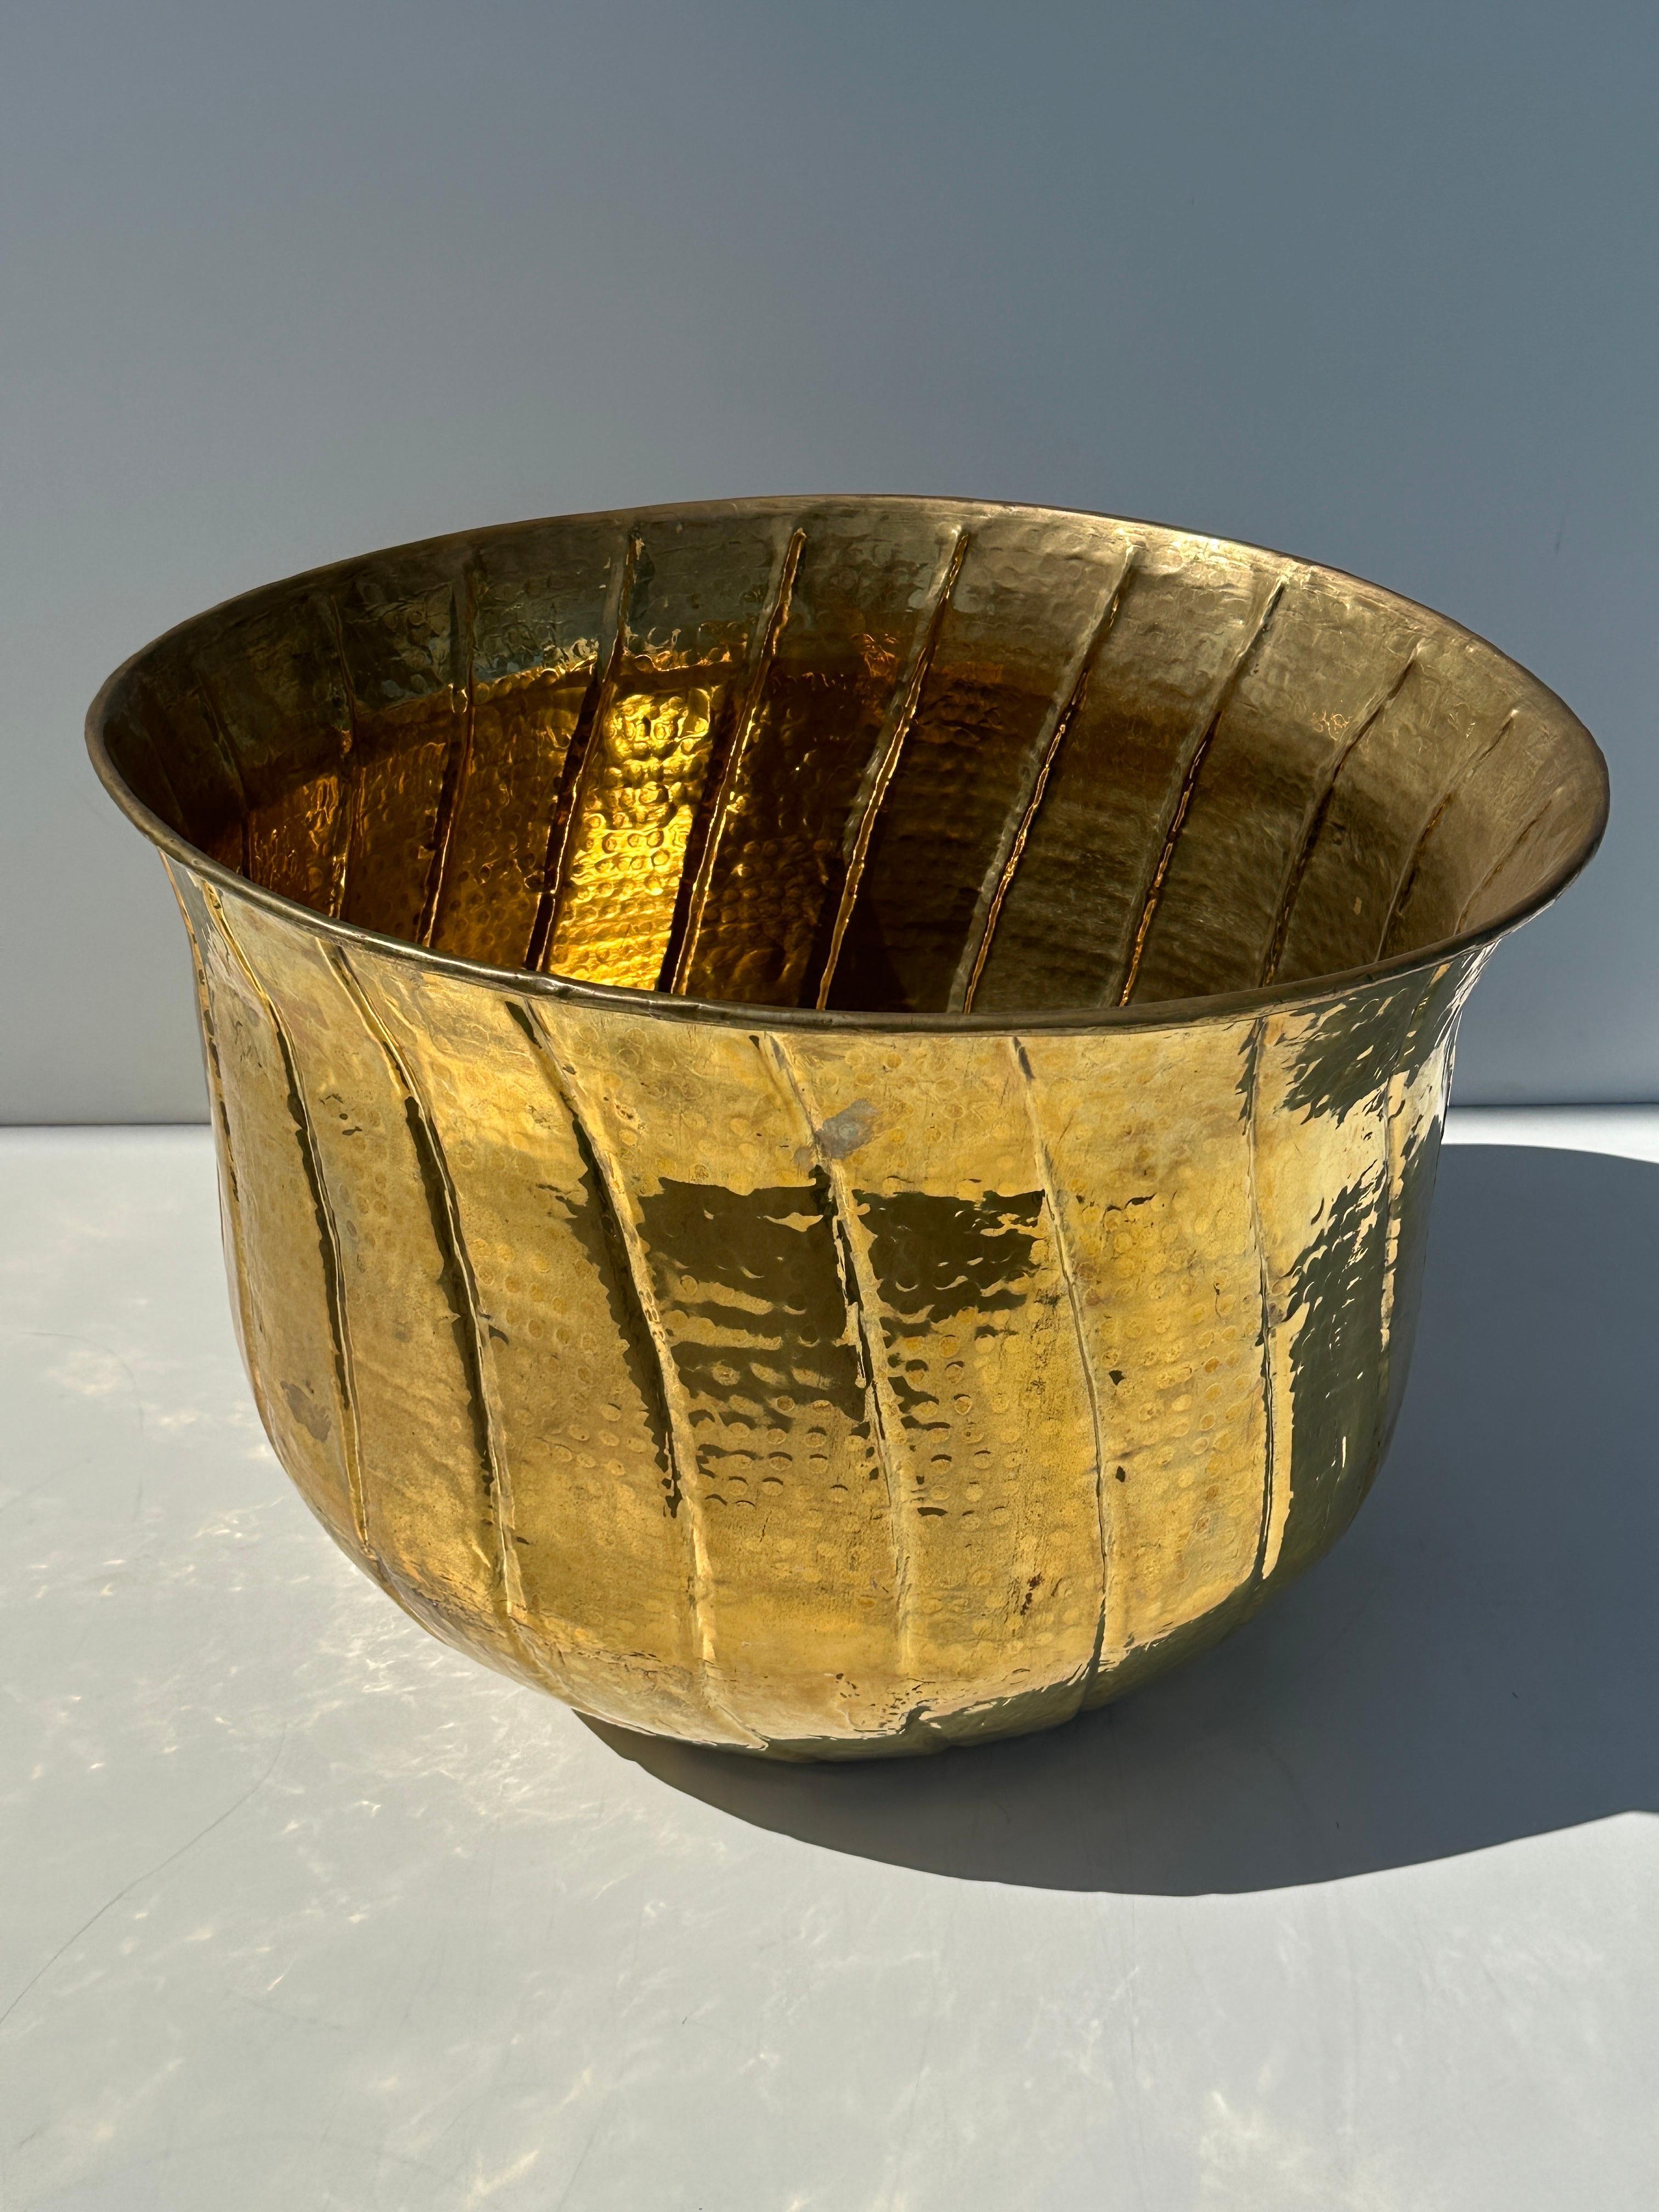 Medium hand hammered brass planter. We also have matching large and extra large planters available shown in last photo.